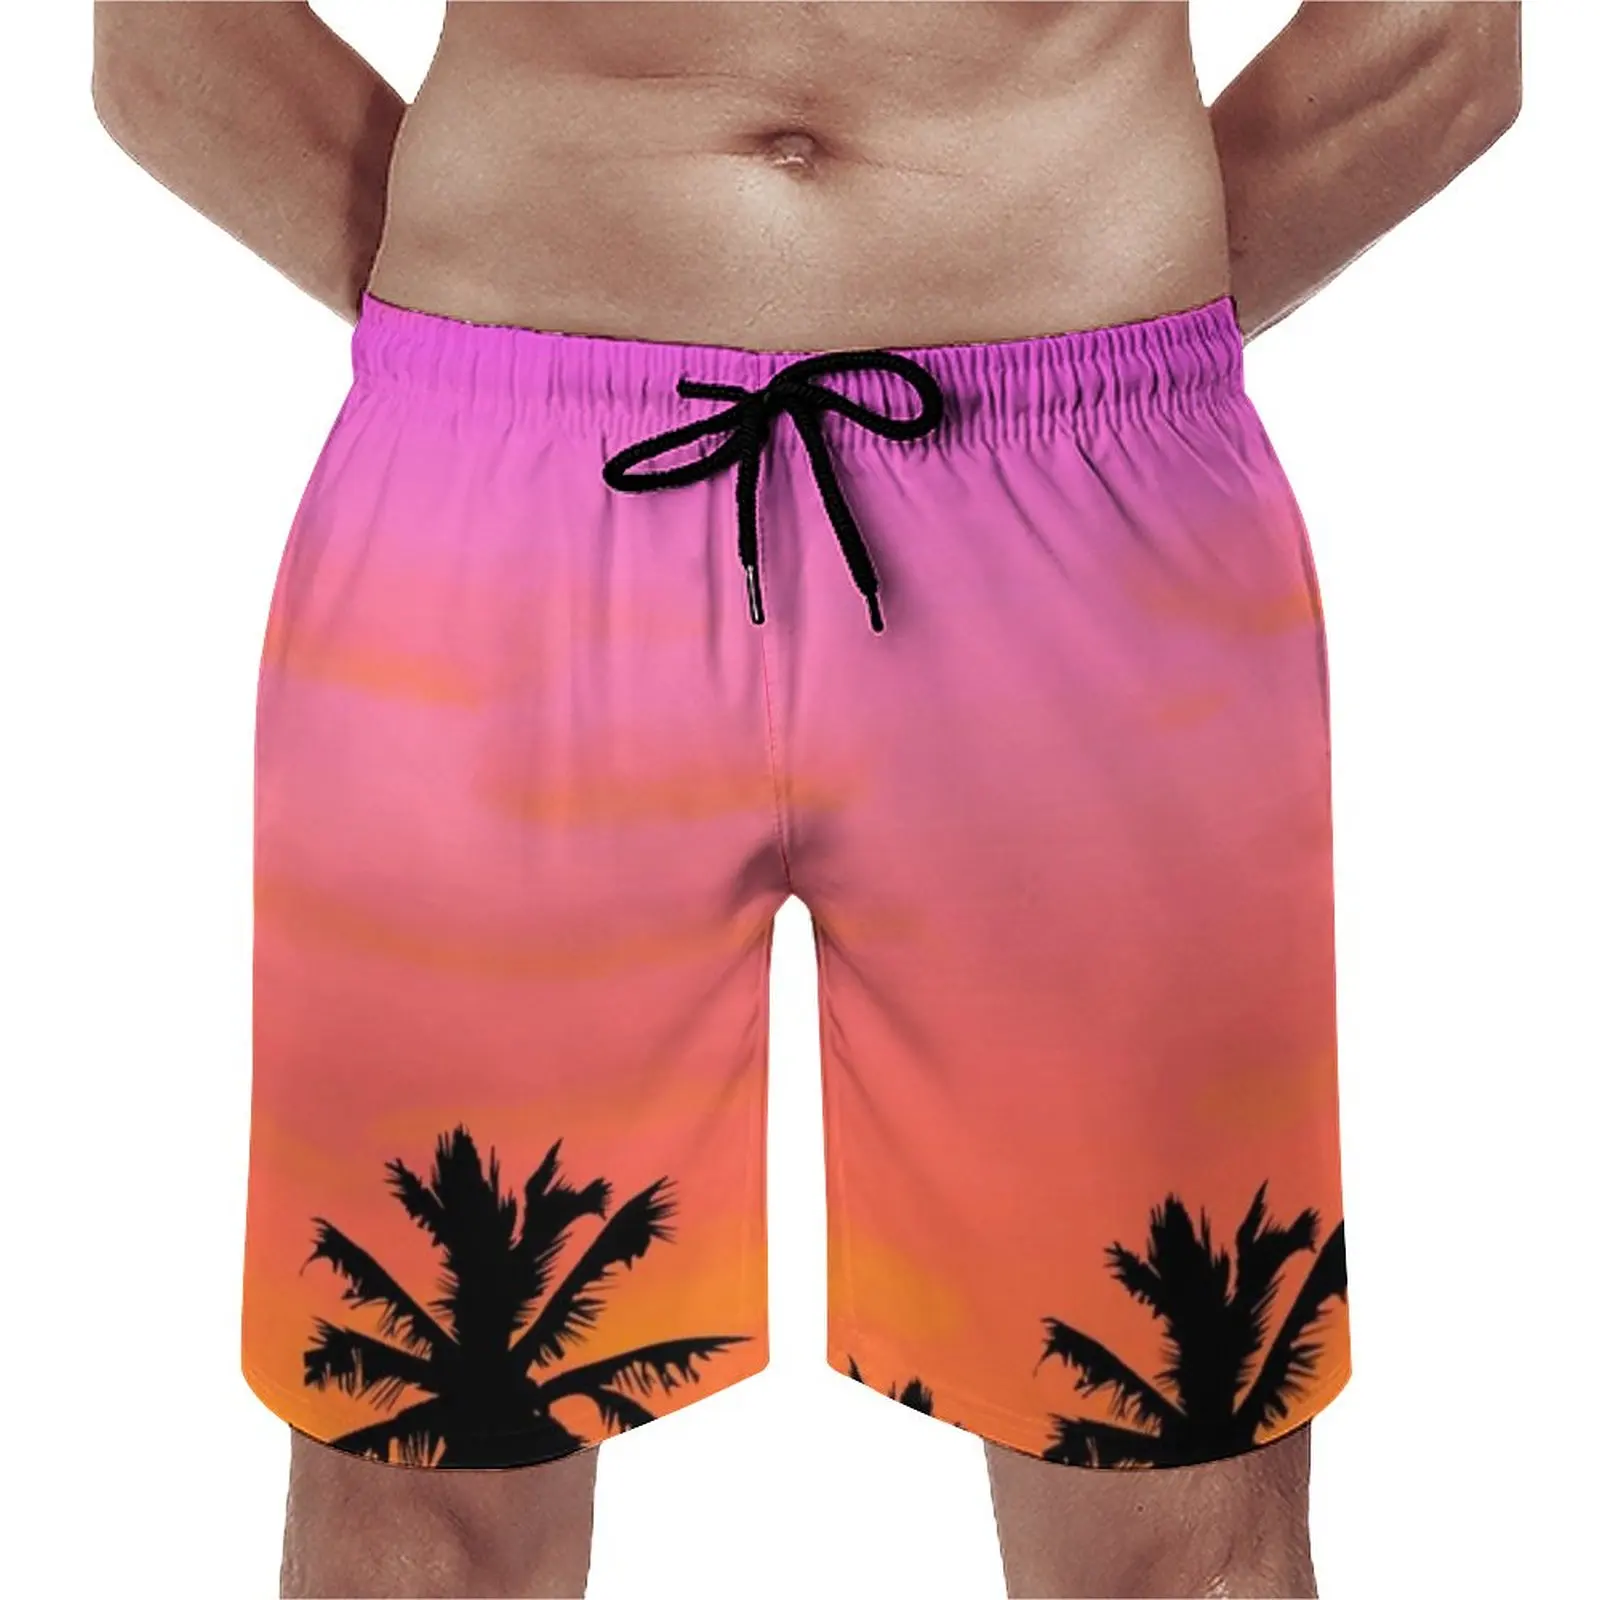 

Island Sunset Board Shorts Summer Palm Trees Print Funny Board Short Pants Males Sports Quick Dry Design Swimming Trunks